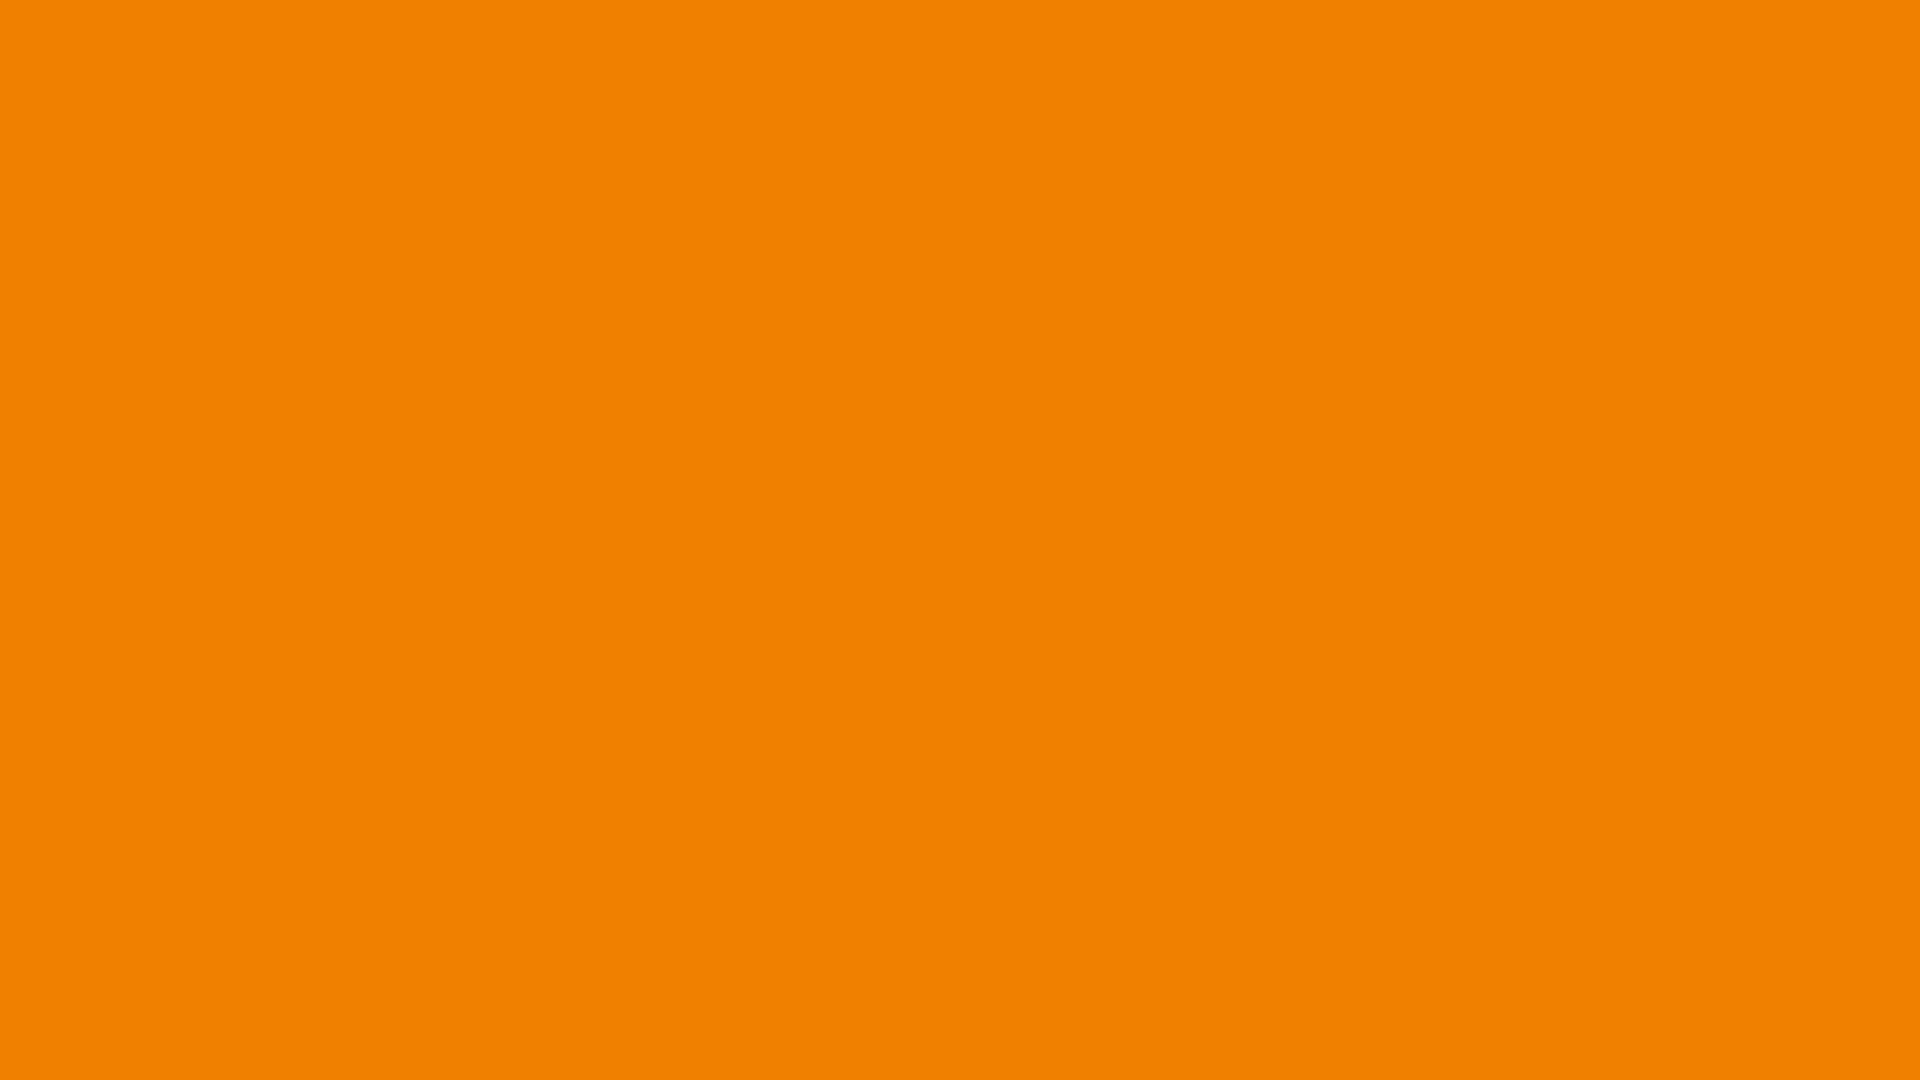 https://htmlcolorcodes.com/assets/images/colors/tangerine-color-solid-background-1920x1080.png